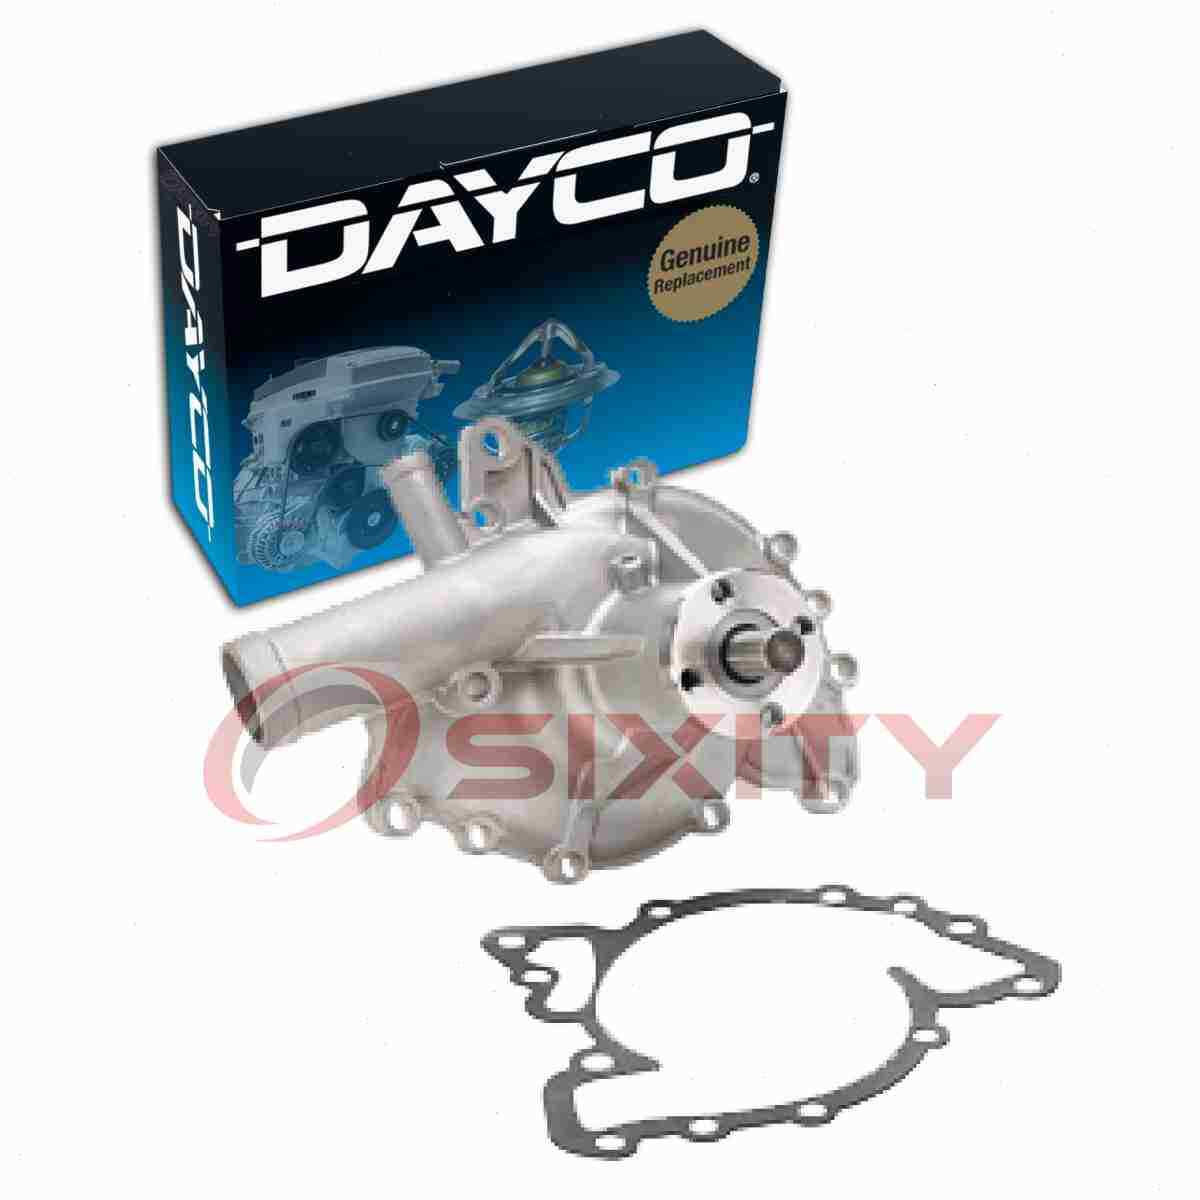 Dayco Engine Water Pump for 1978-1984 Oldsmobile Cutlass Calais 3.8L V6 qy